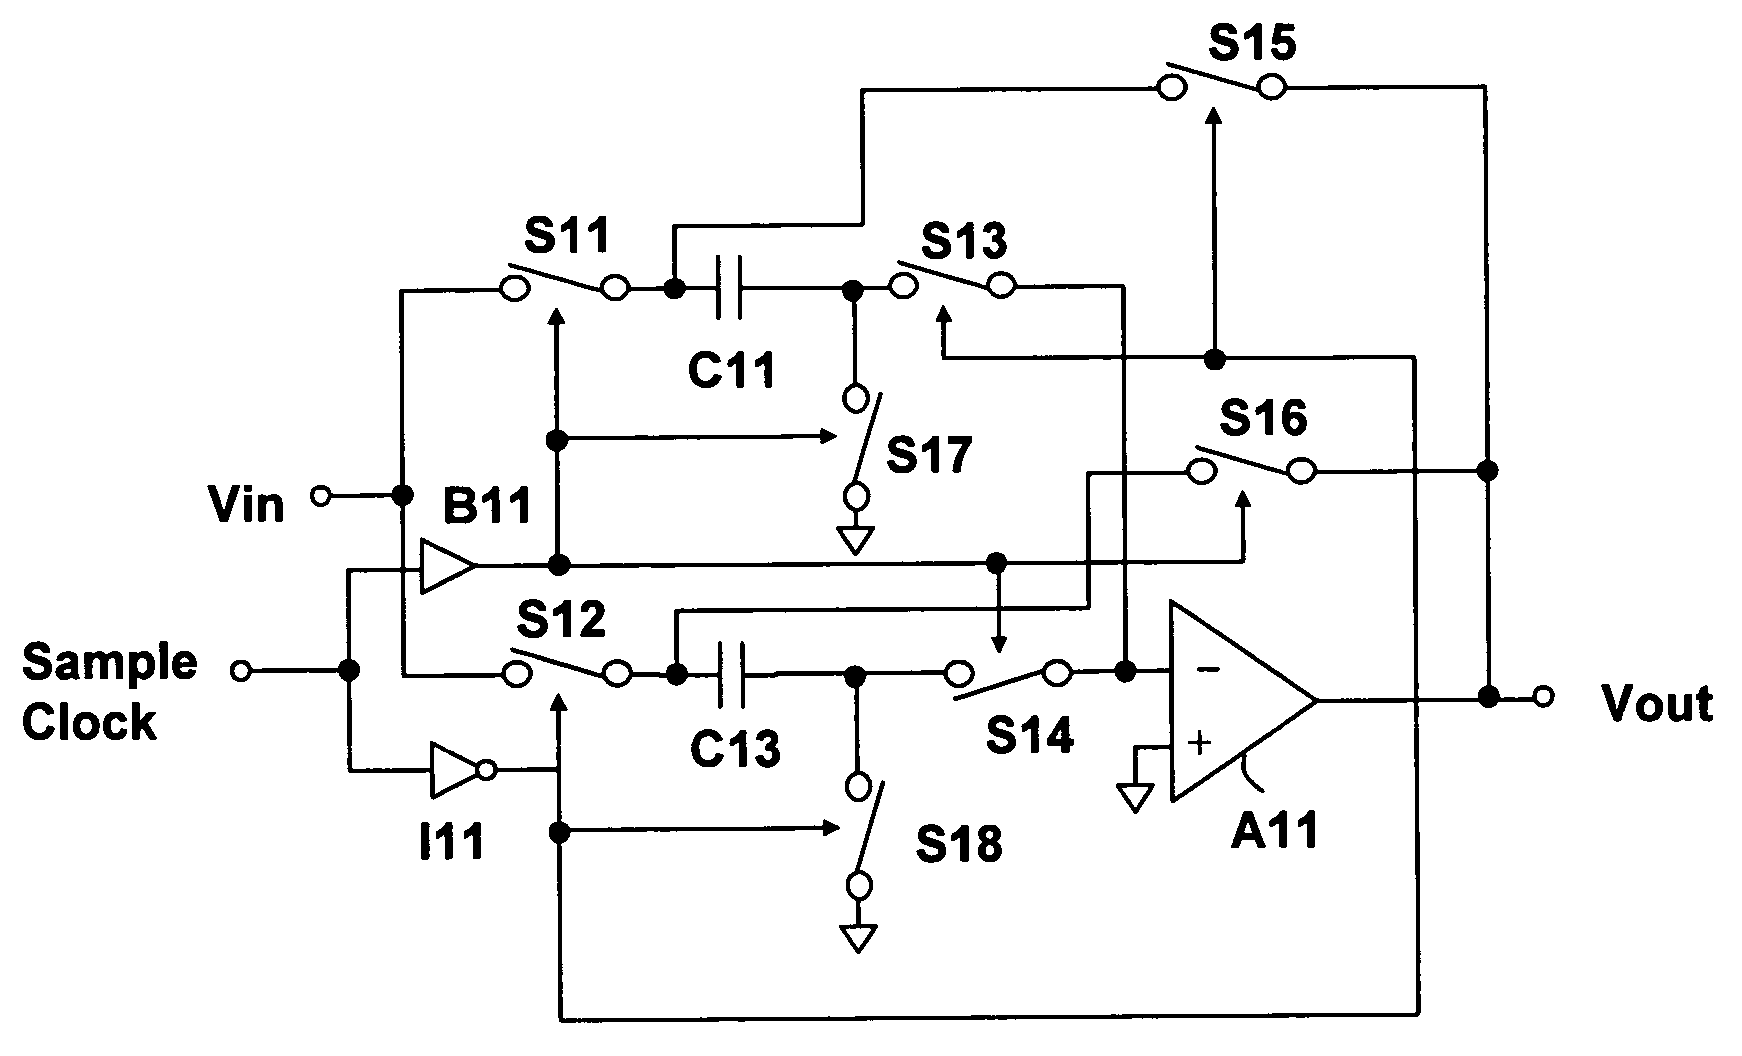 Switched-capacitor sample/hold having reduced amplifier slew-rate and settling time requirements